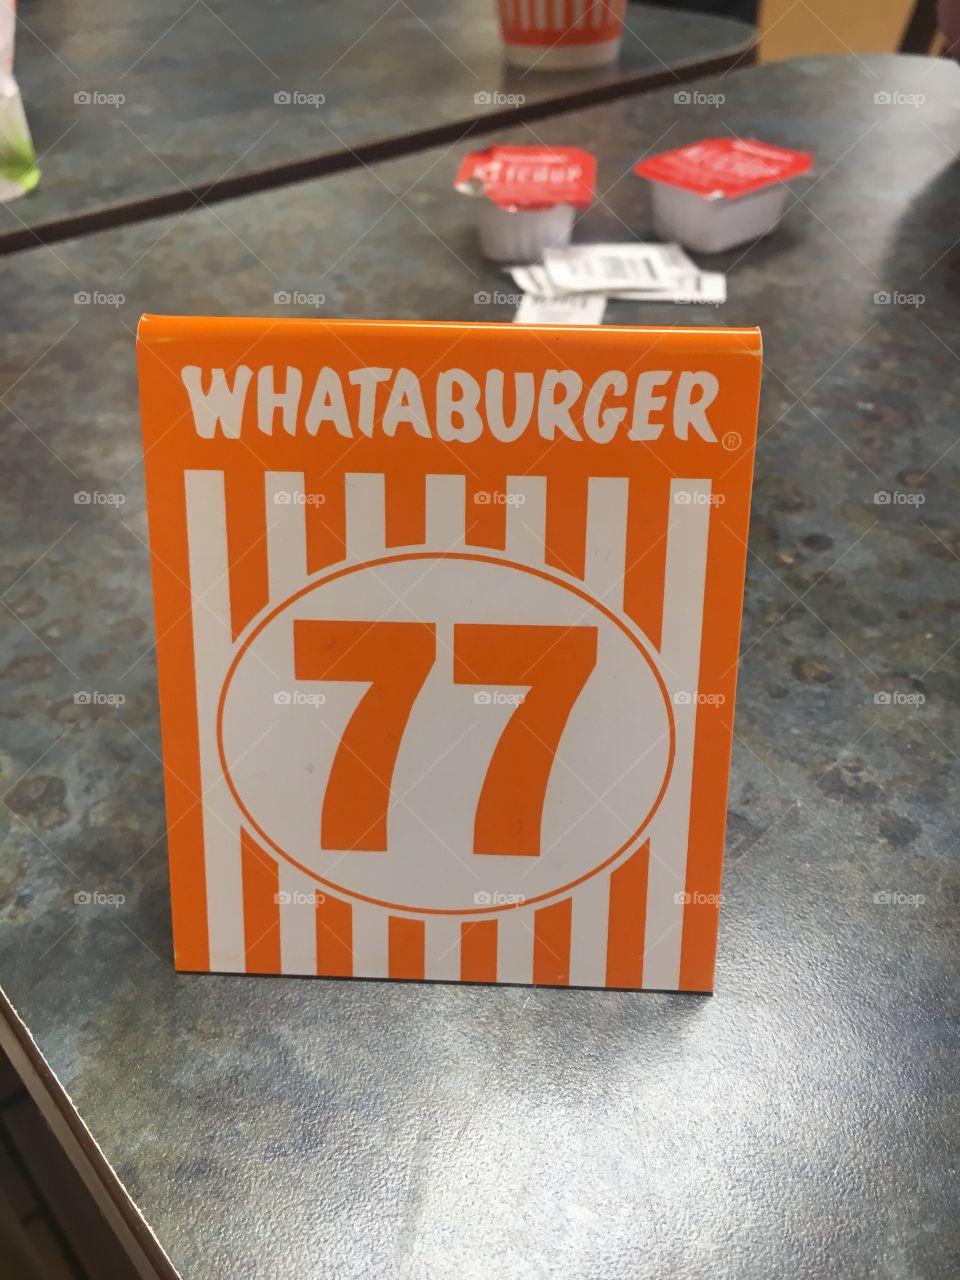 When traveling in Texas there is only one place worth stopping.